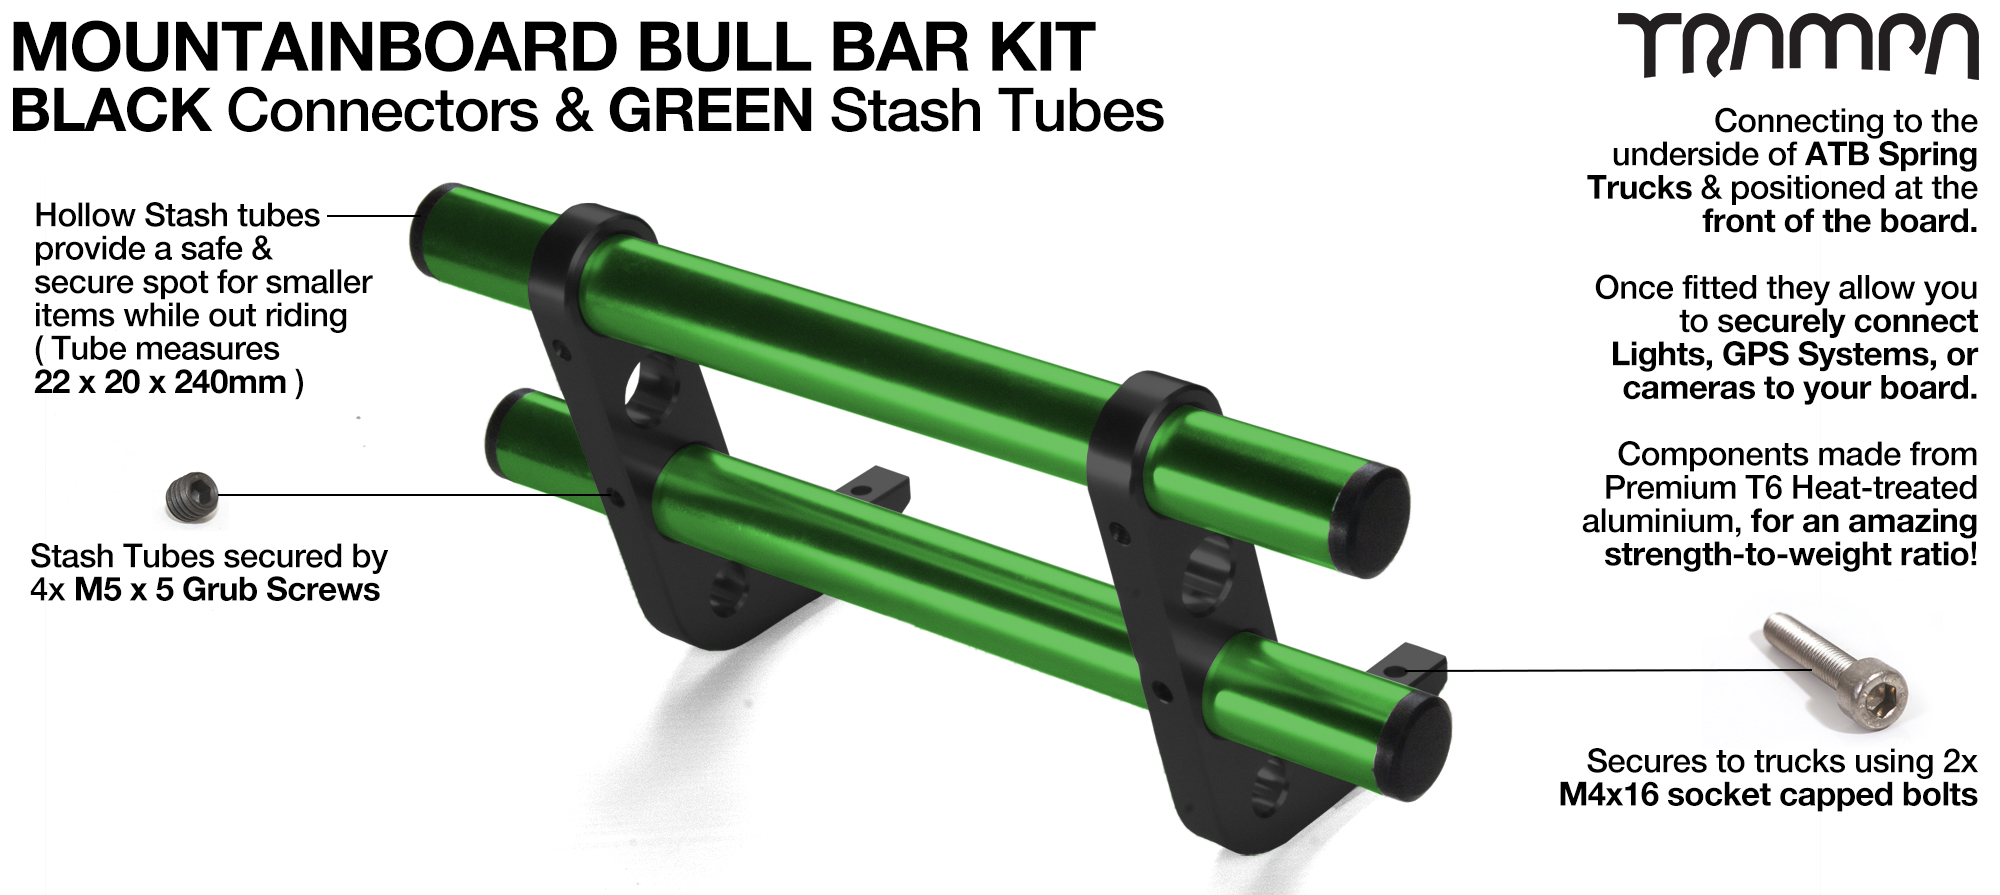 BLACK Uprights & GREEN Crossbar BULL BARS for MOUNTAINBOARDS using T6 Heat Treated CNC'd AluminIum Clamps, Hollow Aluminium Stash Tubes with Rubber end bungs  